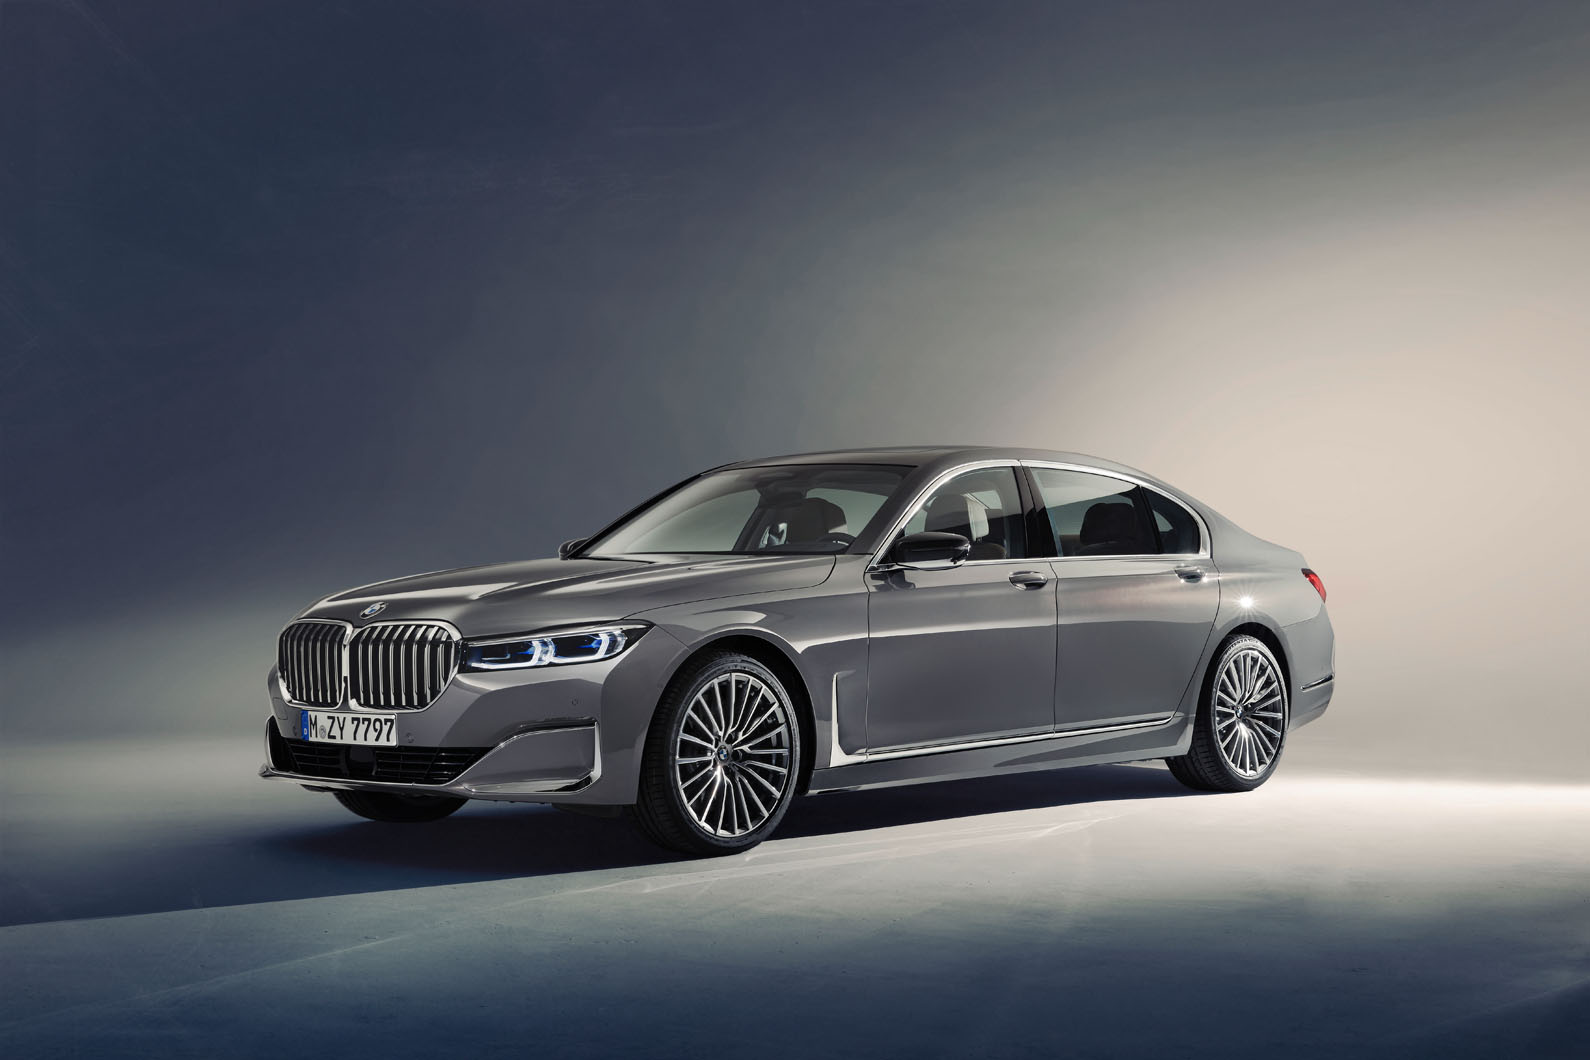 New 2019 BMW 7 Series gets X7-inspired styling and more power | Autocar